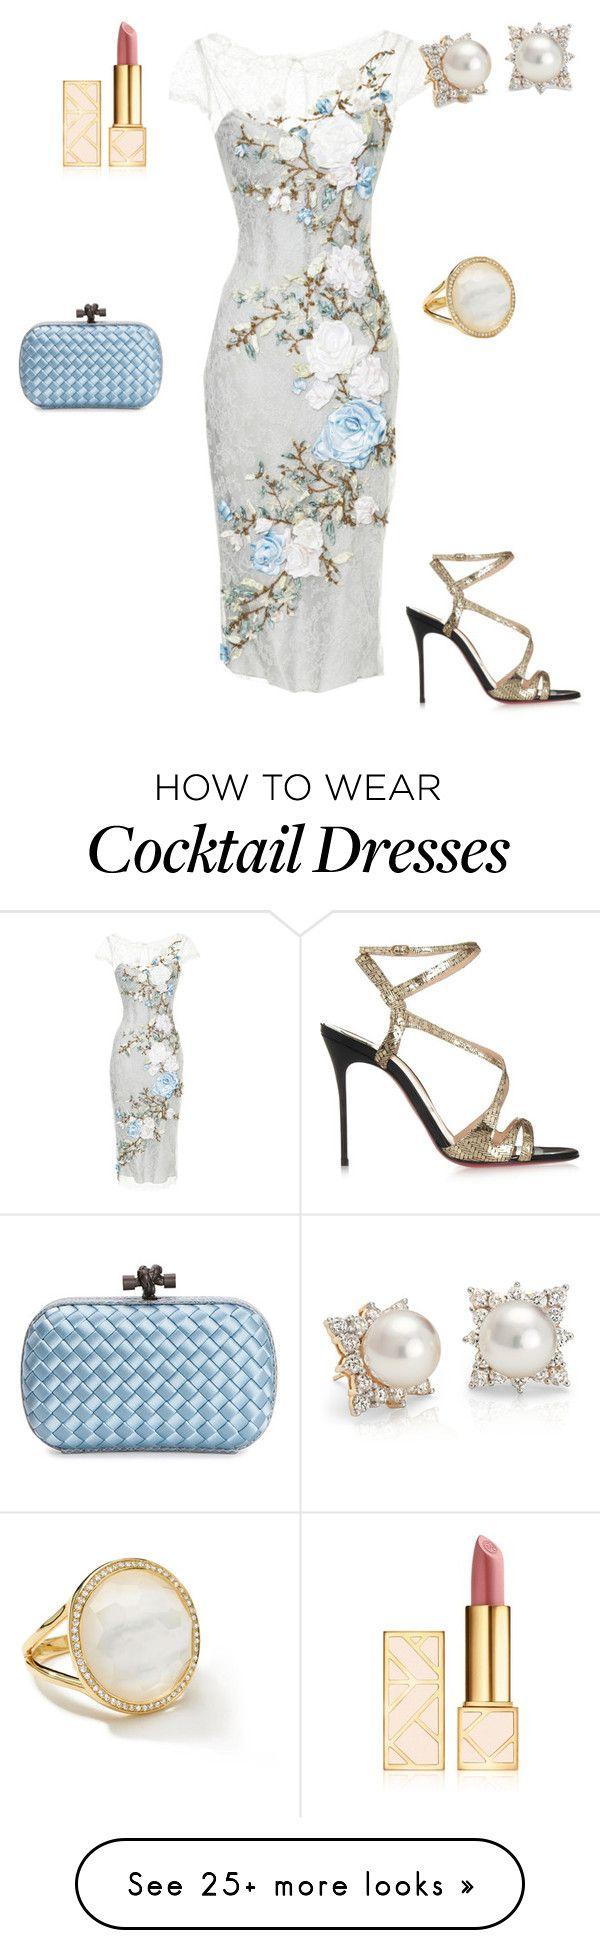 Wedding - Cocktail Dress Outfits